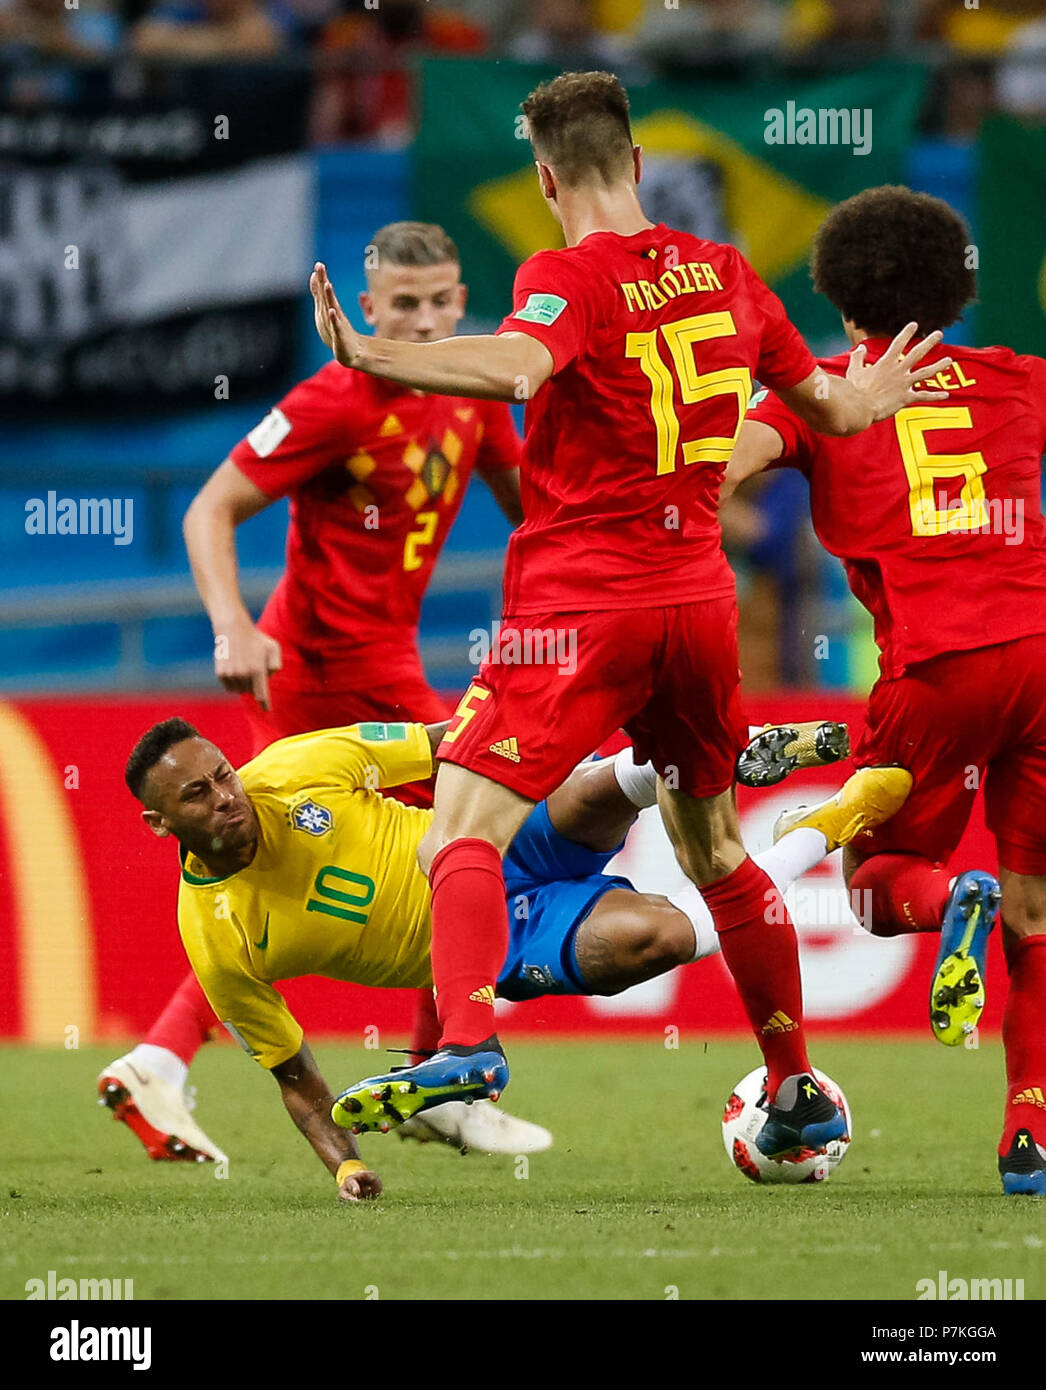 Kazan, Russia. 6th July 2018. Neymar of Brazil is fouled by Thomas Meunier of Belgium during the 2018 FIFA World Cup Quarter Final match between Brazil and Belgium at Kazan Arena on July 6th 2018 in Kazan, Russia. (Photo by Daniel Chesterton/phcimages.com) Credit: PHC Images/Alamy Live News Stock Photo